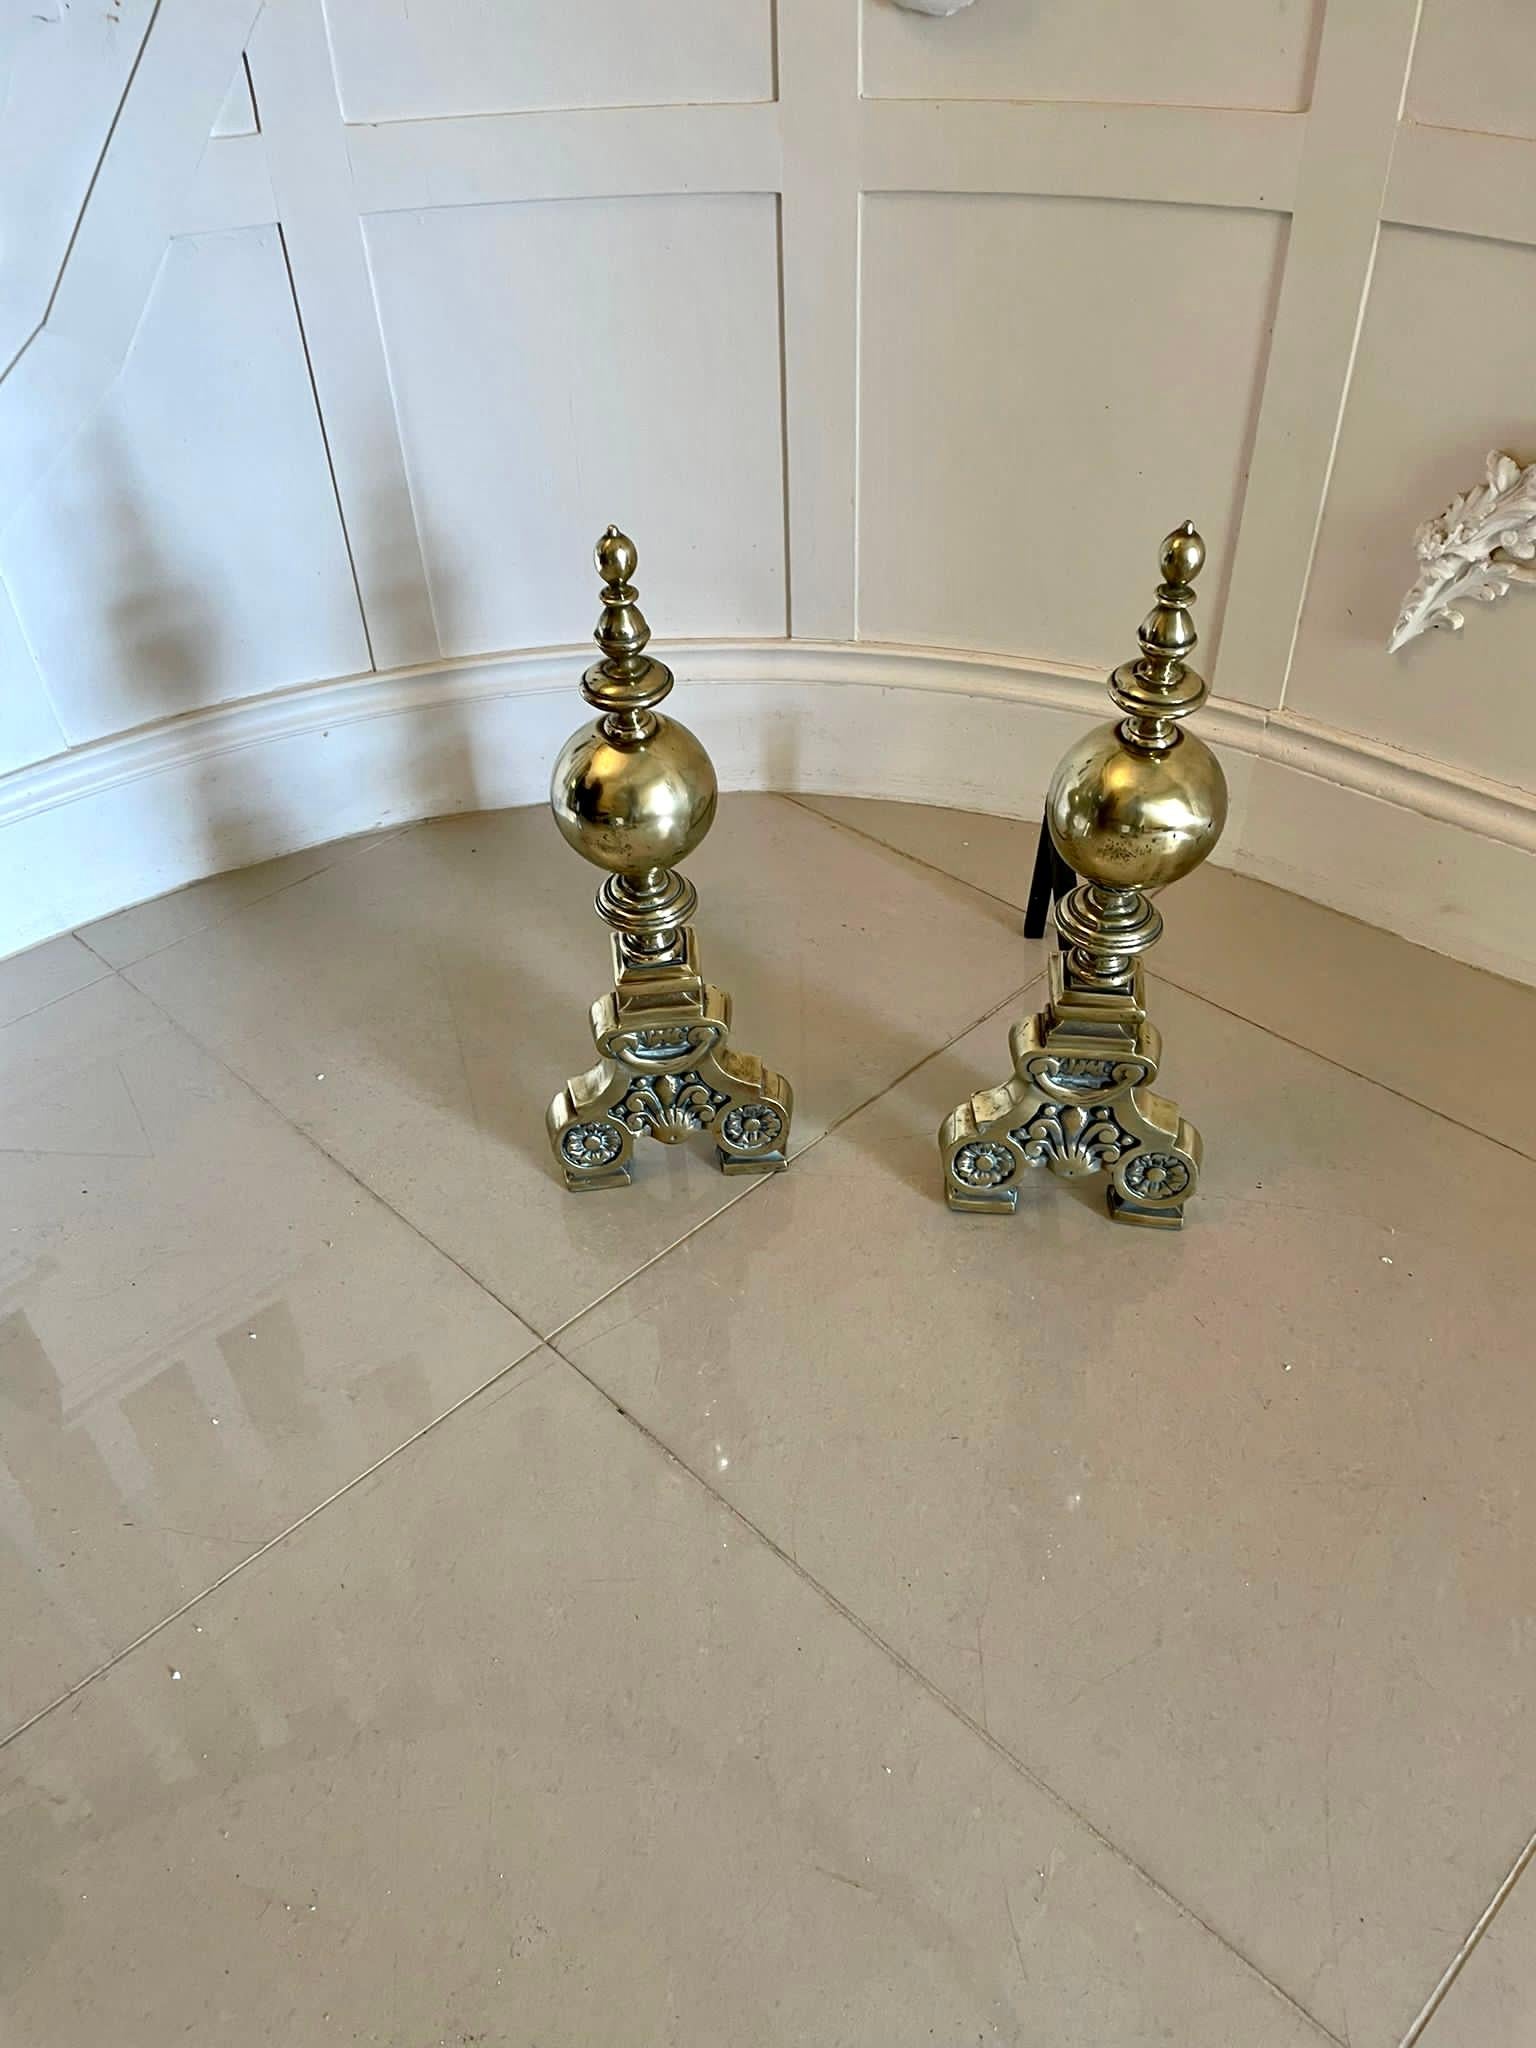 Superb Quality Ornate Antique Victorian Pair of Brass Fire Dogs For Sale 2